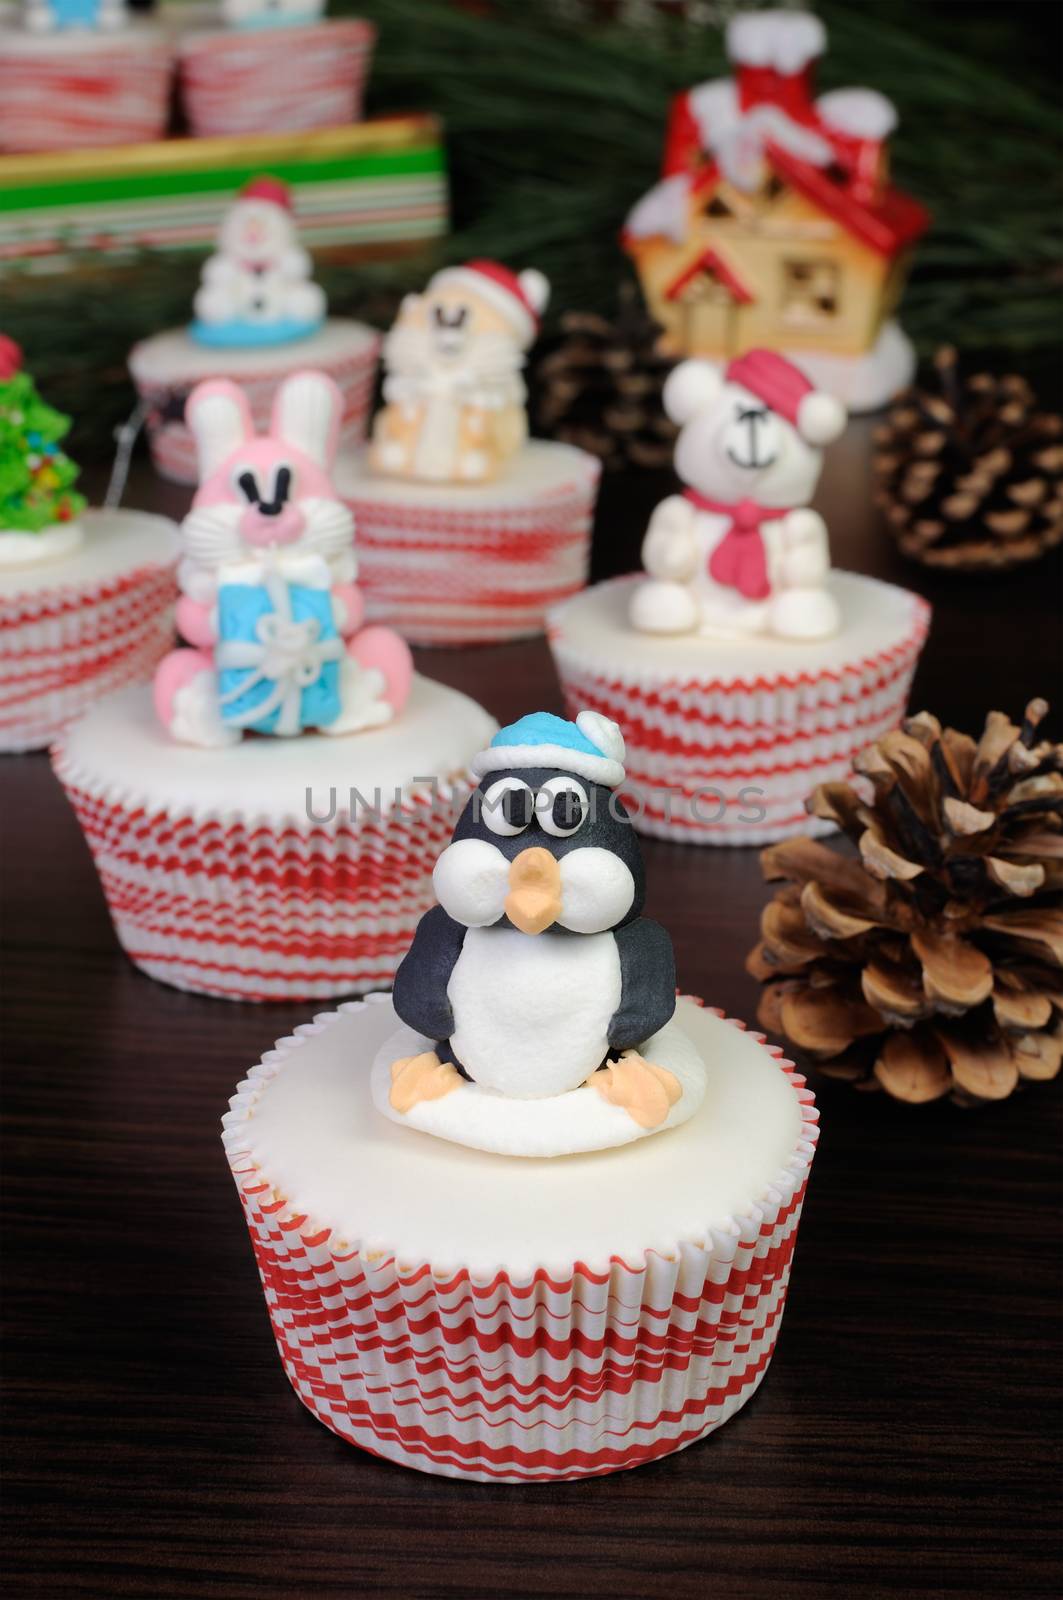 Sugar Christmas penguin figurine on a muffin by Apolonia